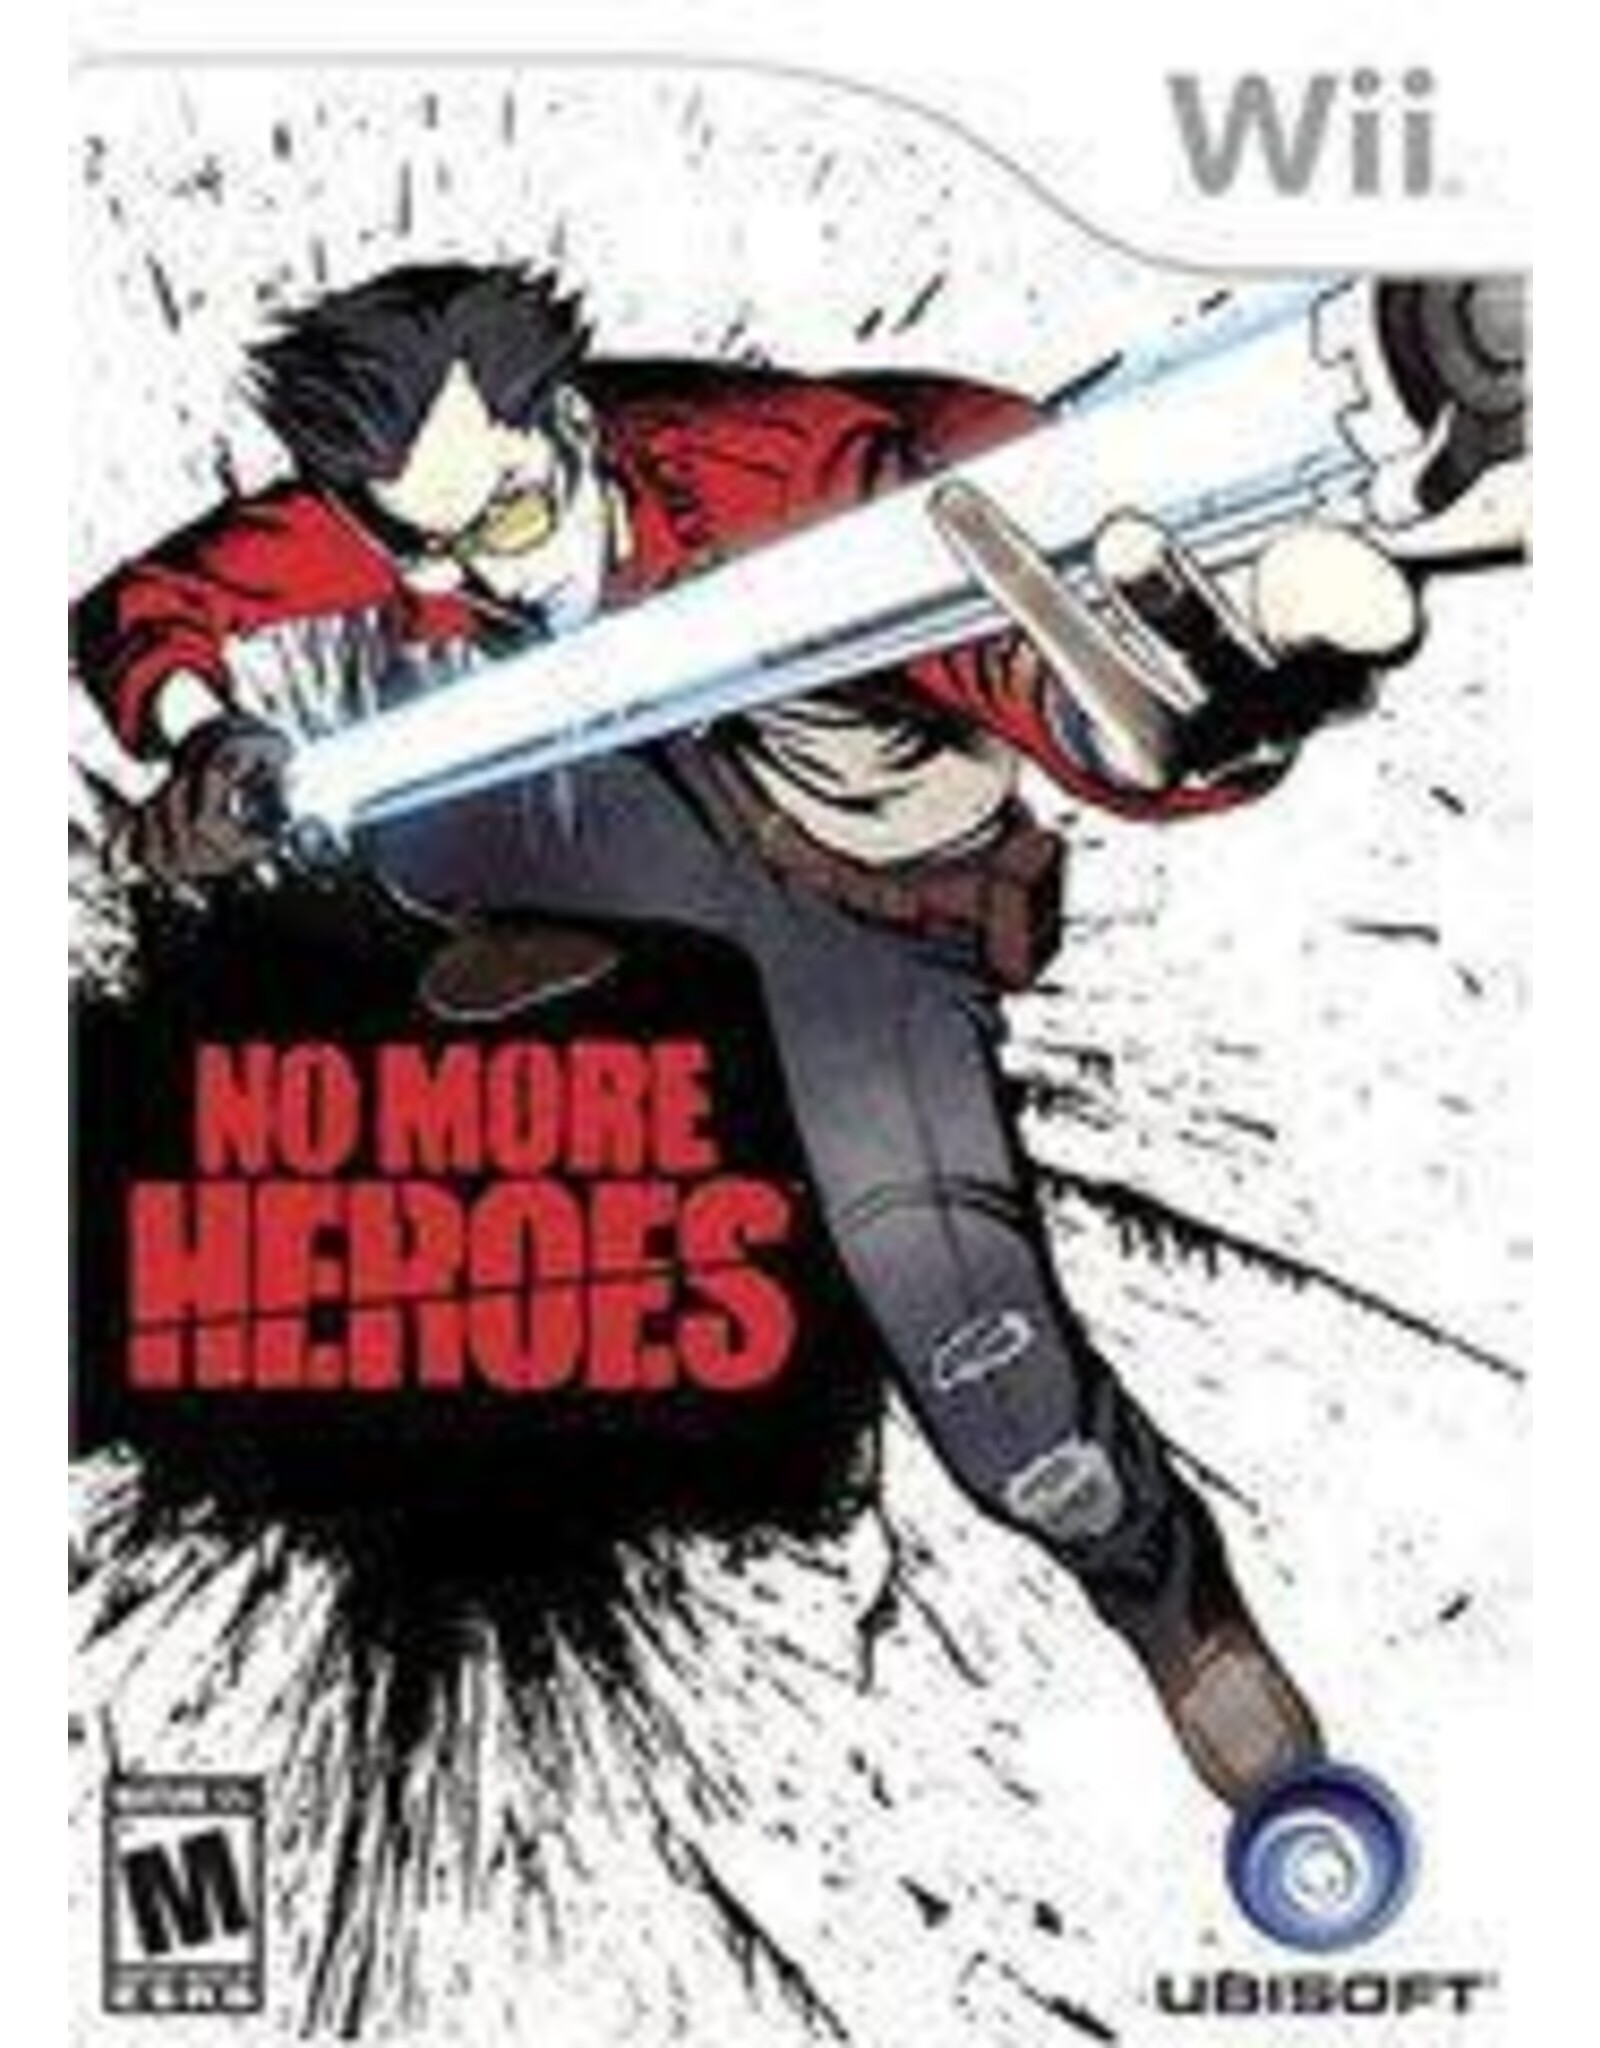 Wii No More Heroes (Used, No Manual)